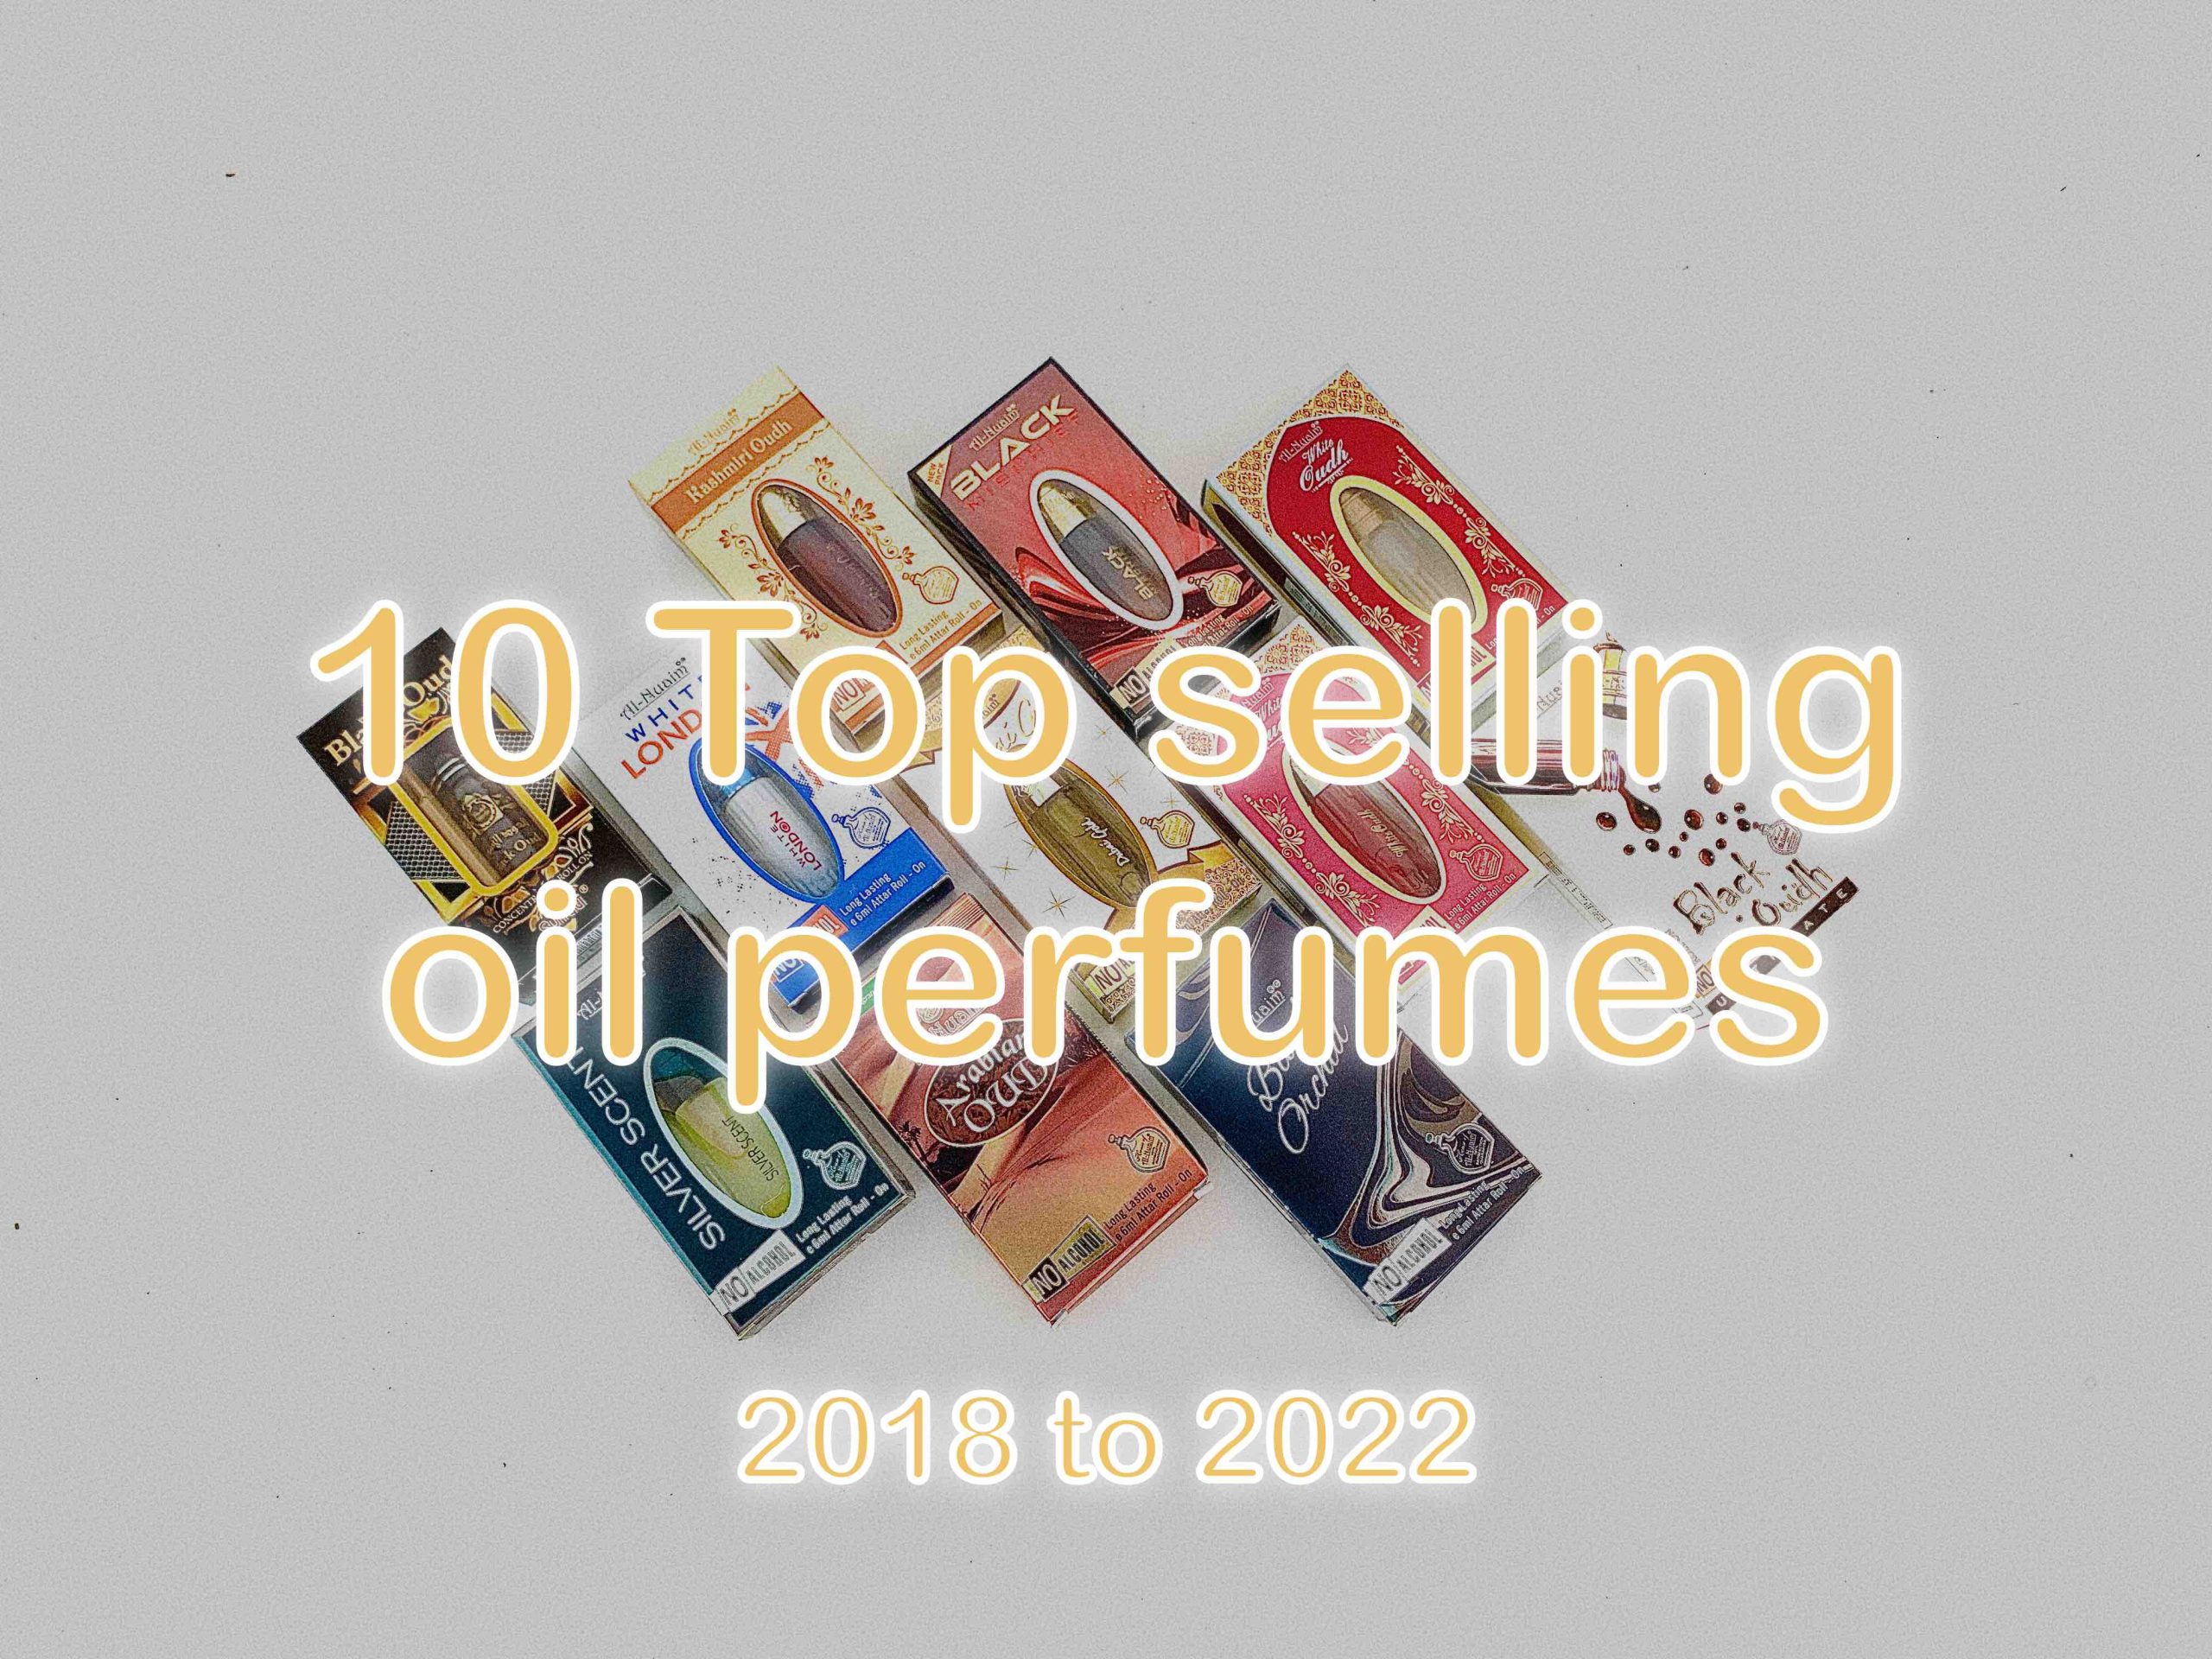 10-Top-selling-oil-perfumes-on-DOT-Made-from-2018-to-2022